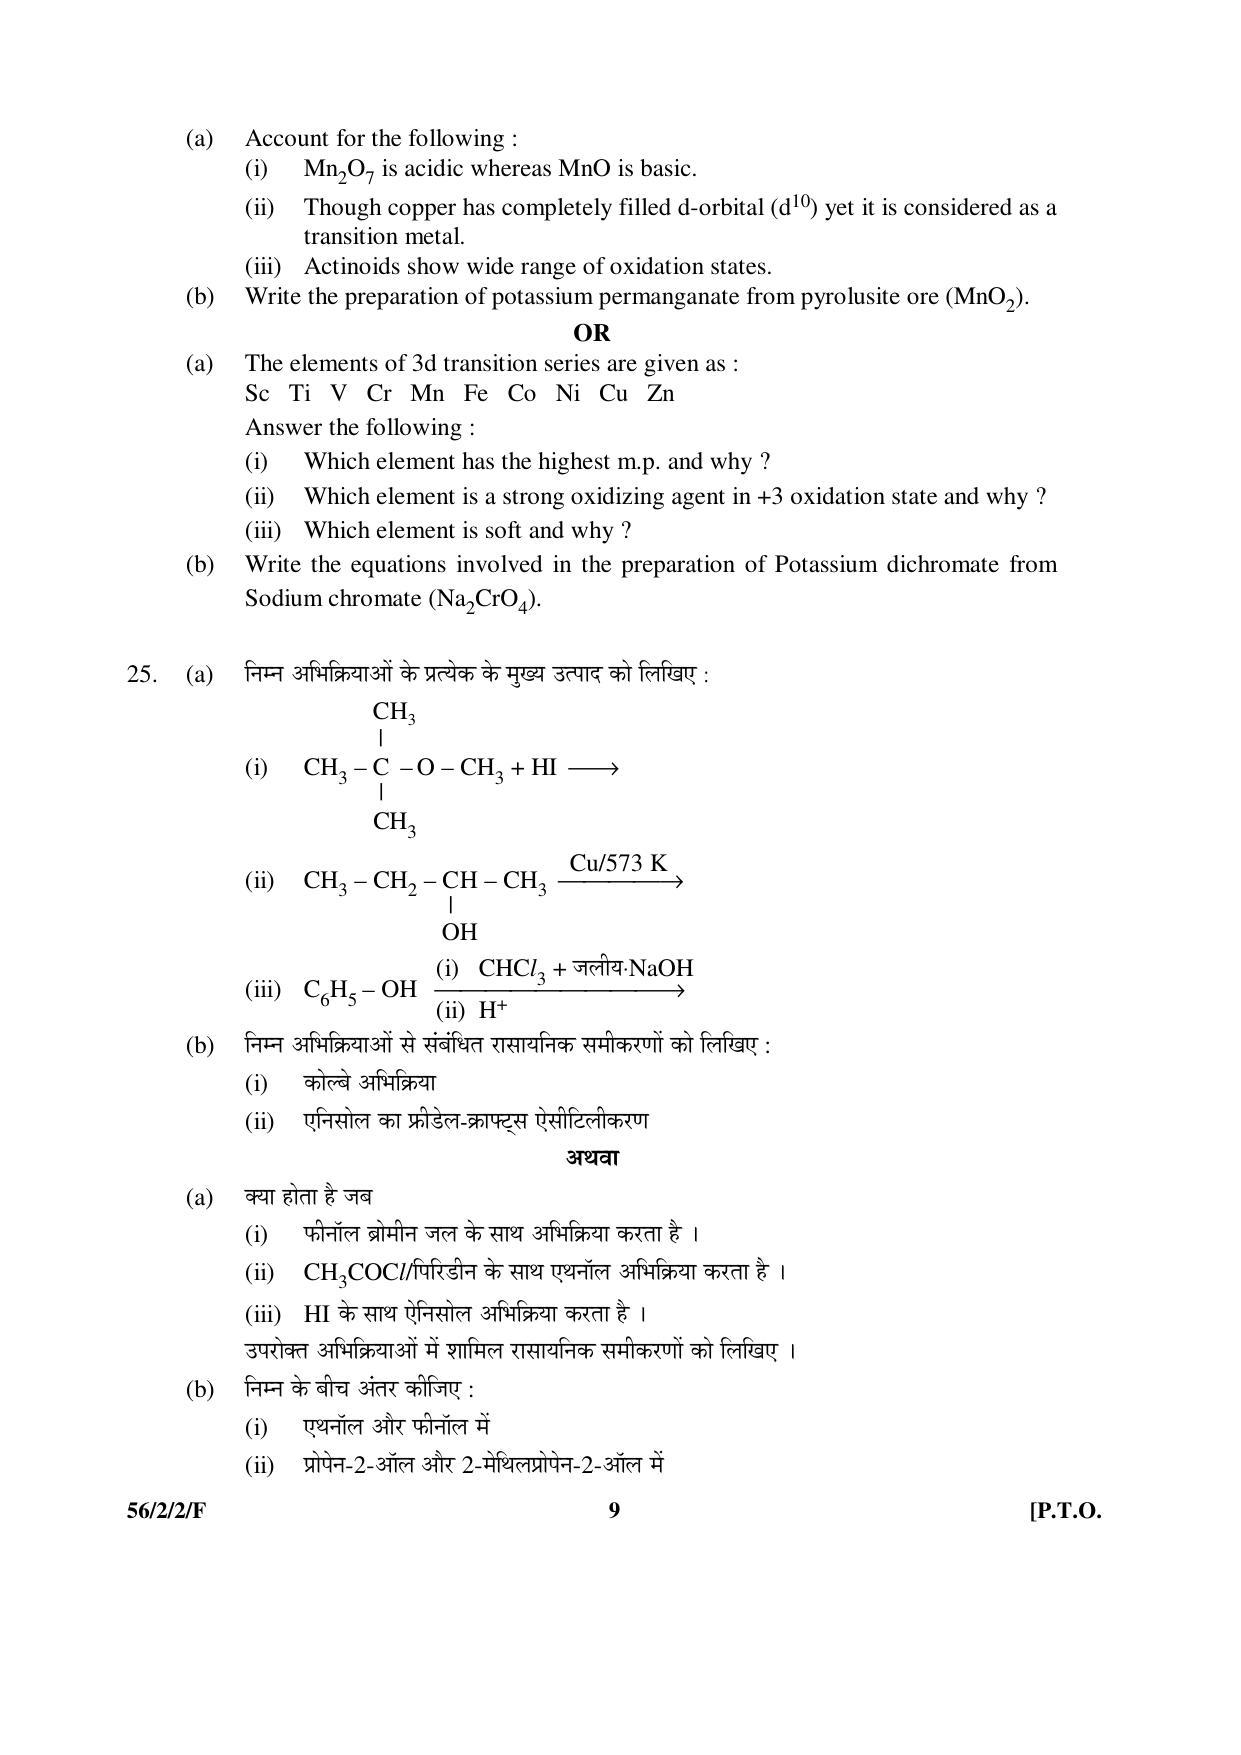 CBSE Class 12 56-2-2-F _Chemistry_ 2016 Question Paper - Page 9